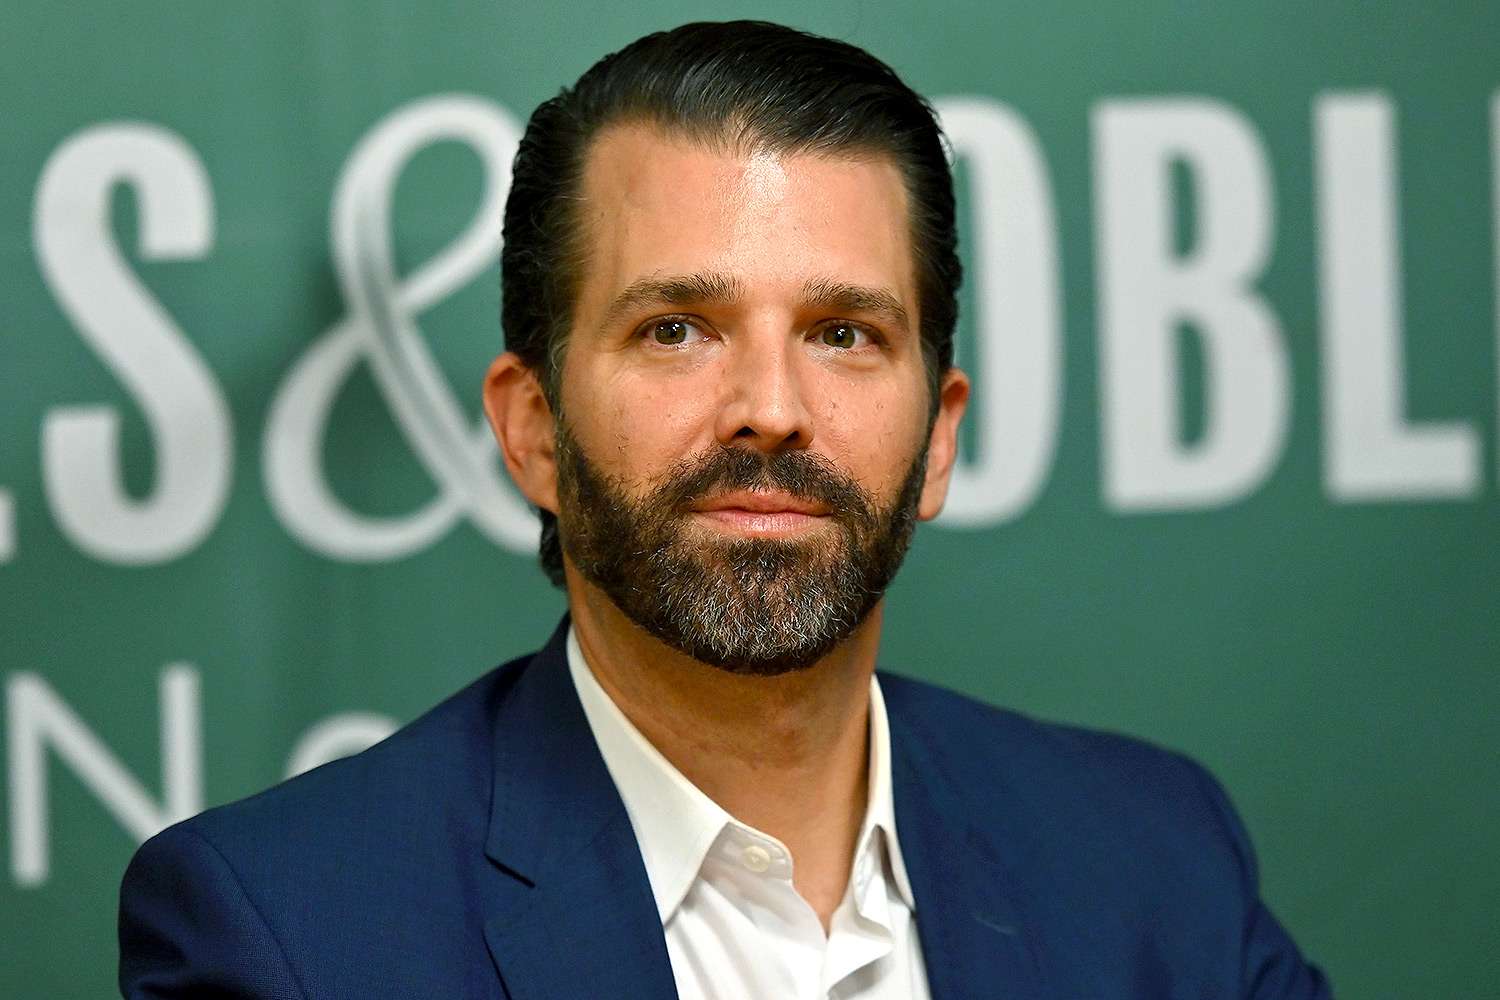 Donald Trump Jr. Says He Hasn't 'Personally Thought About' 2024